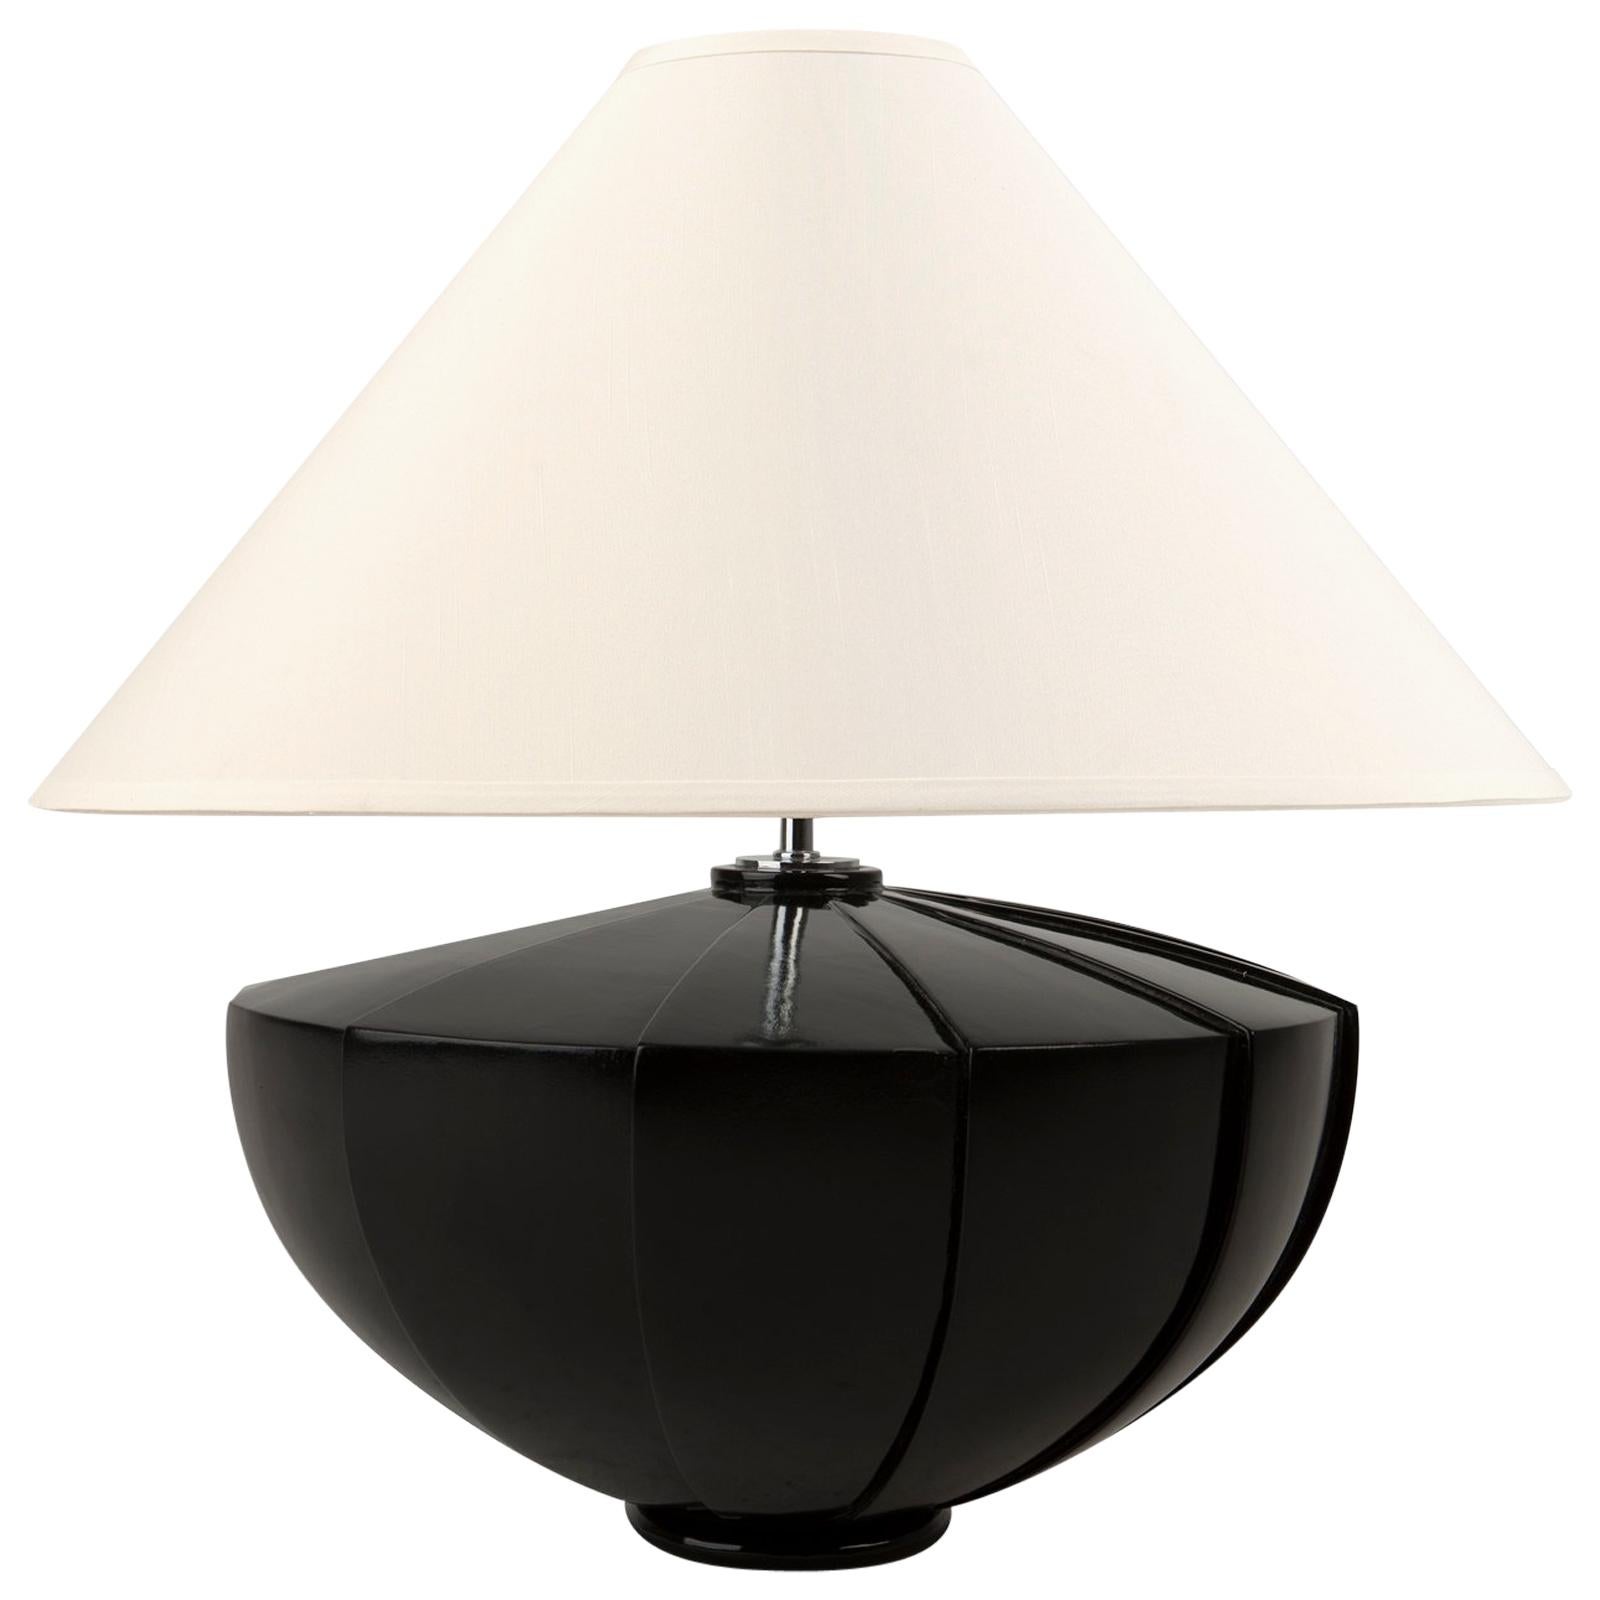 Black Shell Table Lamp in Solid Mahogany Wood